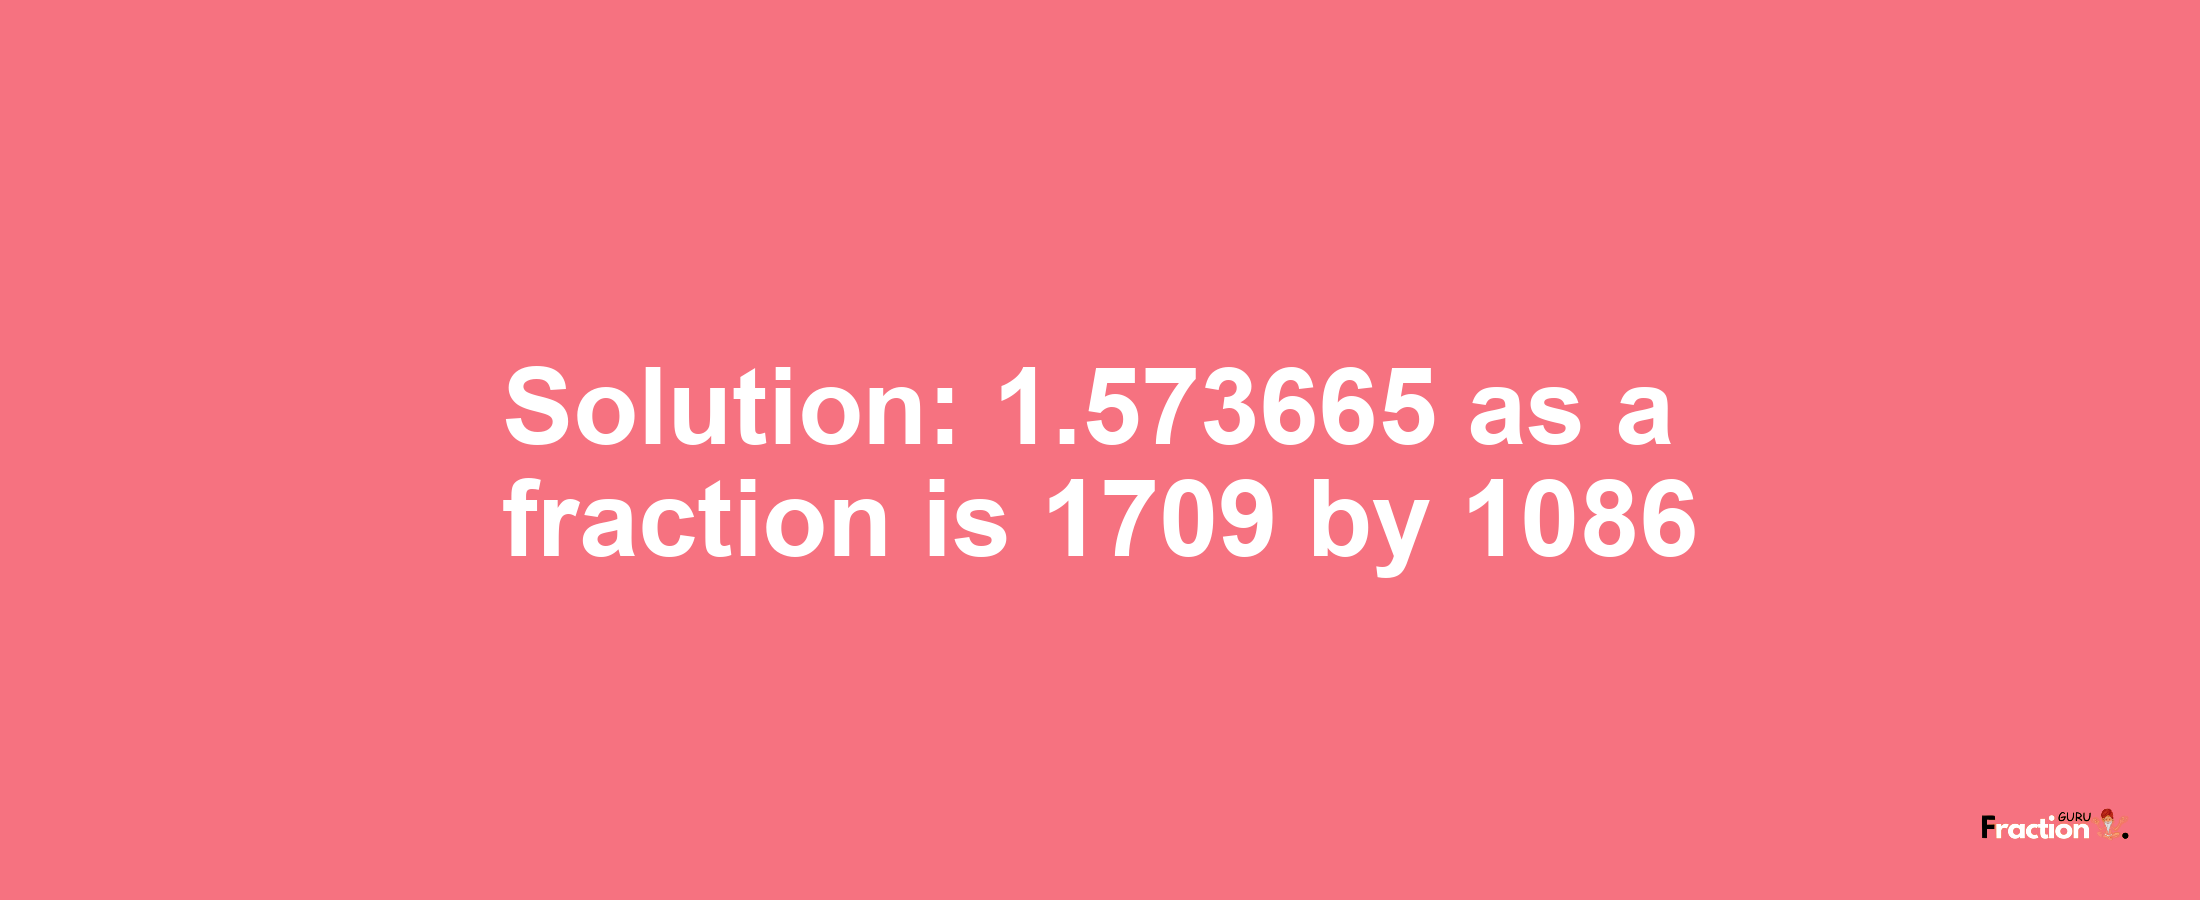 Solution:1.573665 as a fraction is 1709/1086